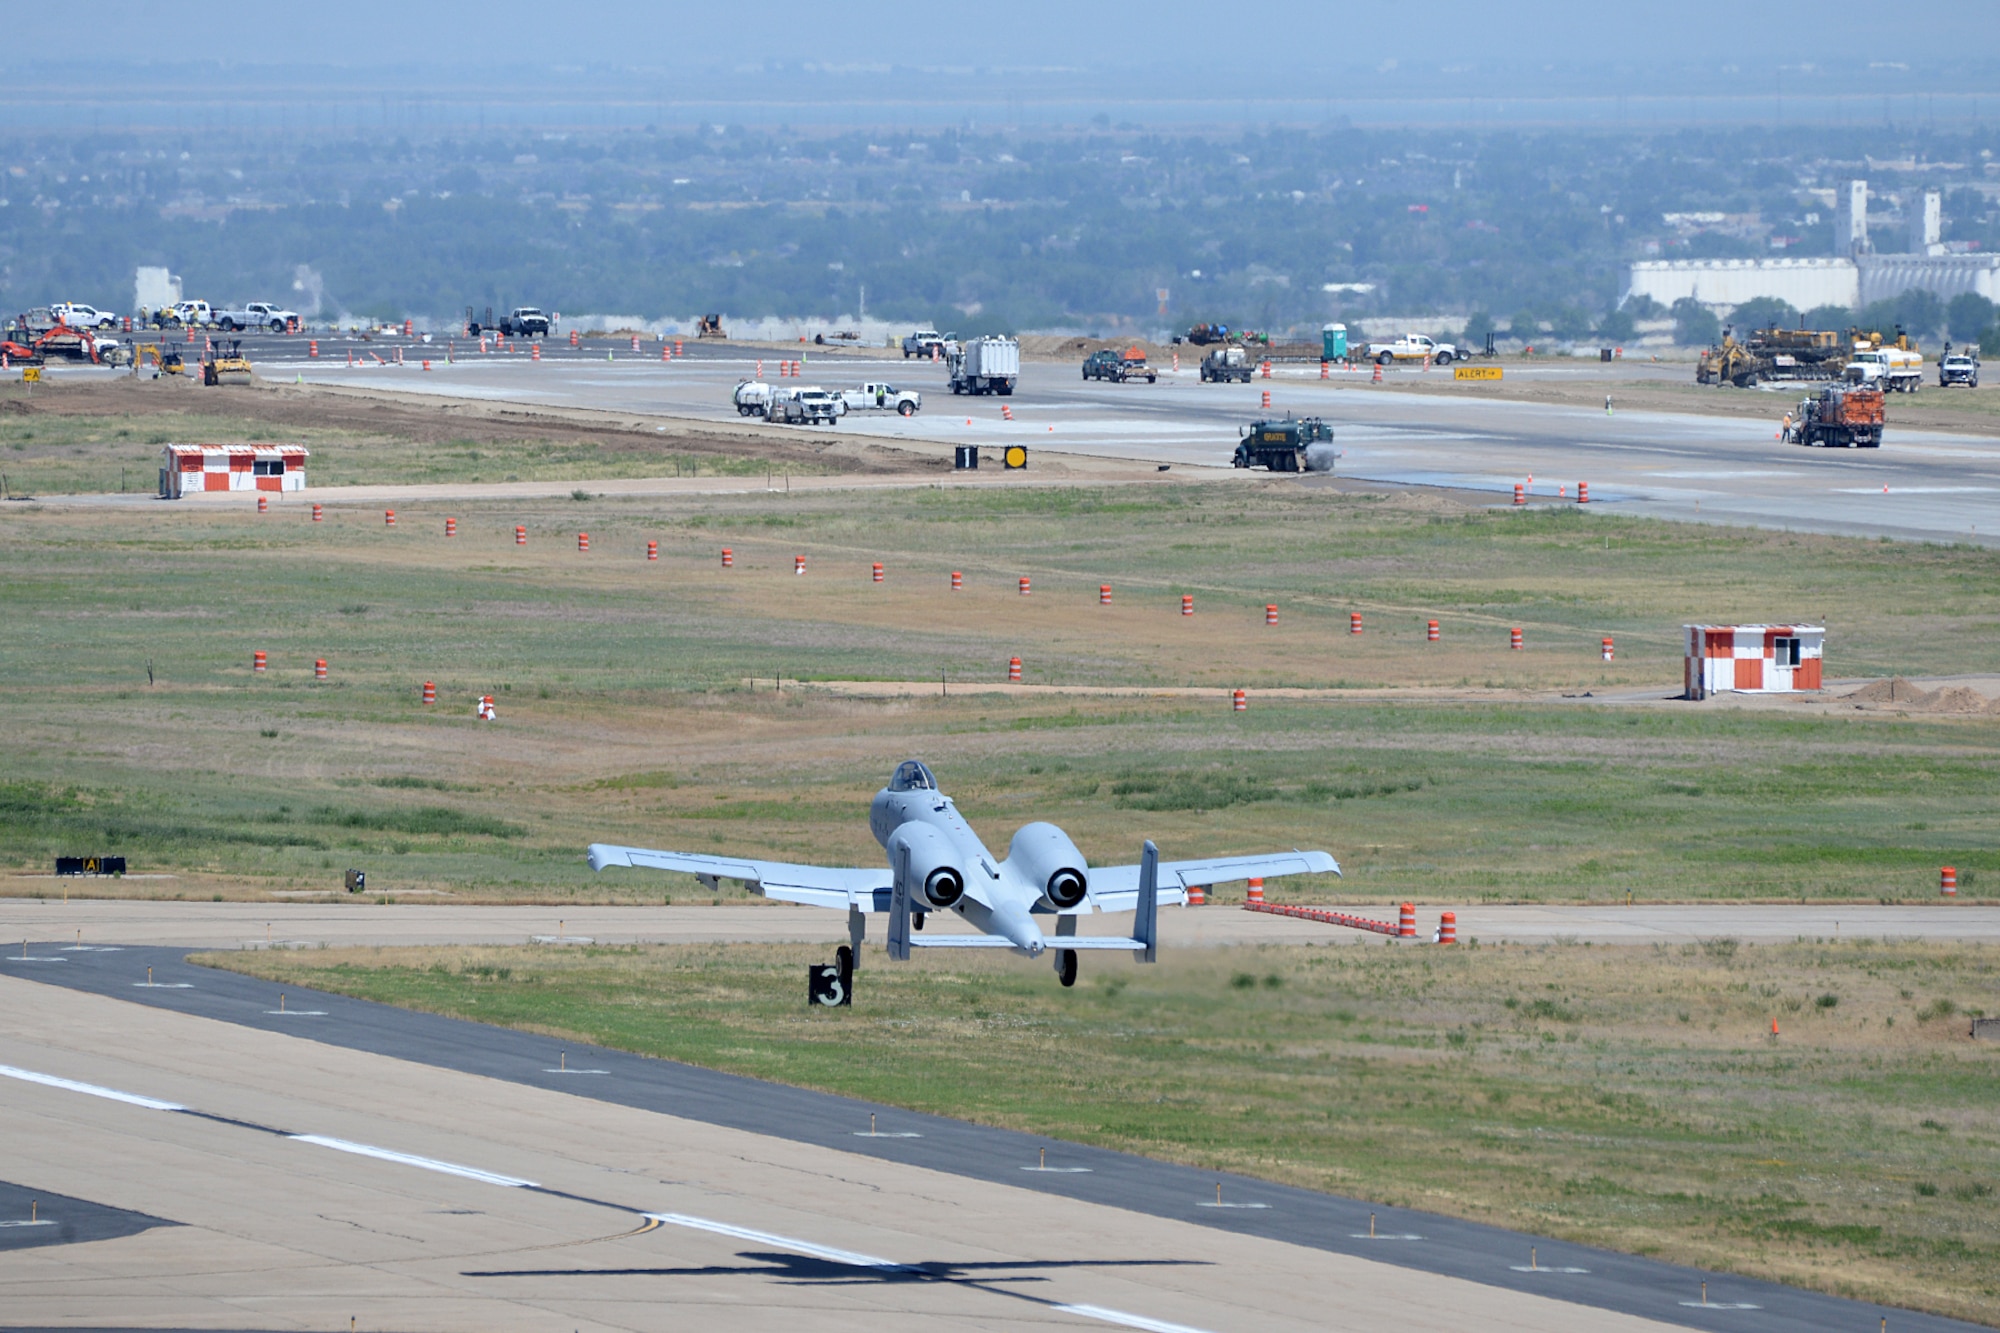 Runway construction efforts can be seen from the control tower as Col. James Doyle, 413th Flight Test Group test pilot, takes off to the north from taxiway Alpha in an A-10 Thunderbolt II at Hill Air Force Base, Utah, July 10, 2019. The runway at Hill AFB was closed for most of the summer, requiring test pilots from the 514th to temporarily use the taxiway as a runway. (U.S. Air Force photo by Alex R. Lloyd)